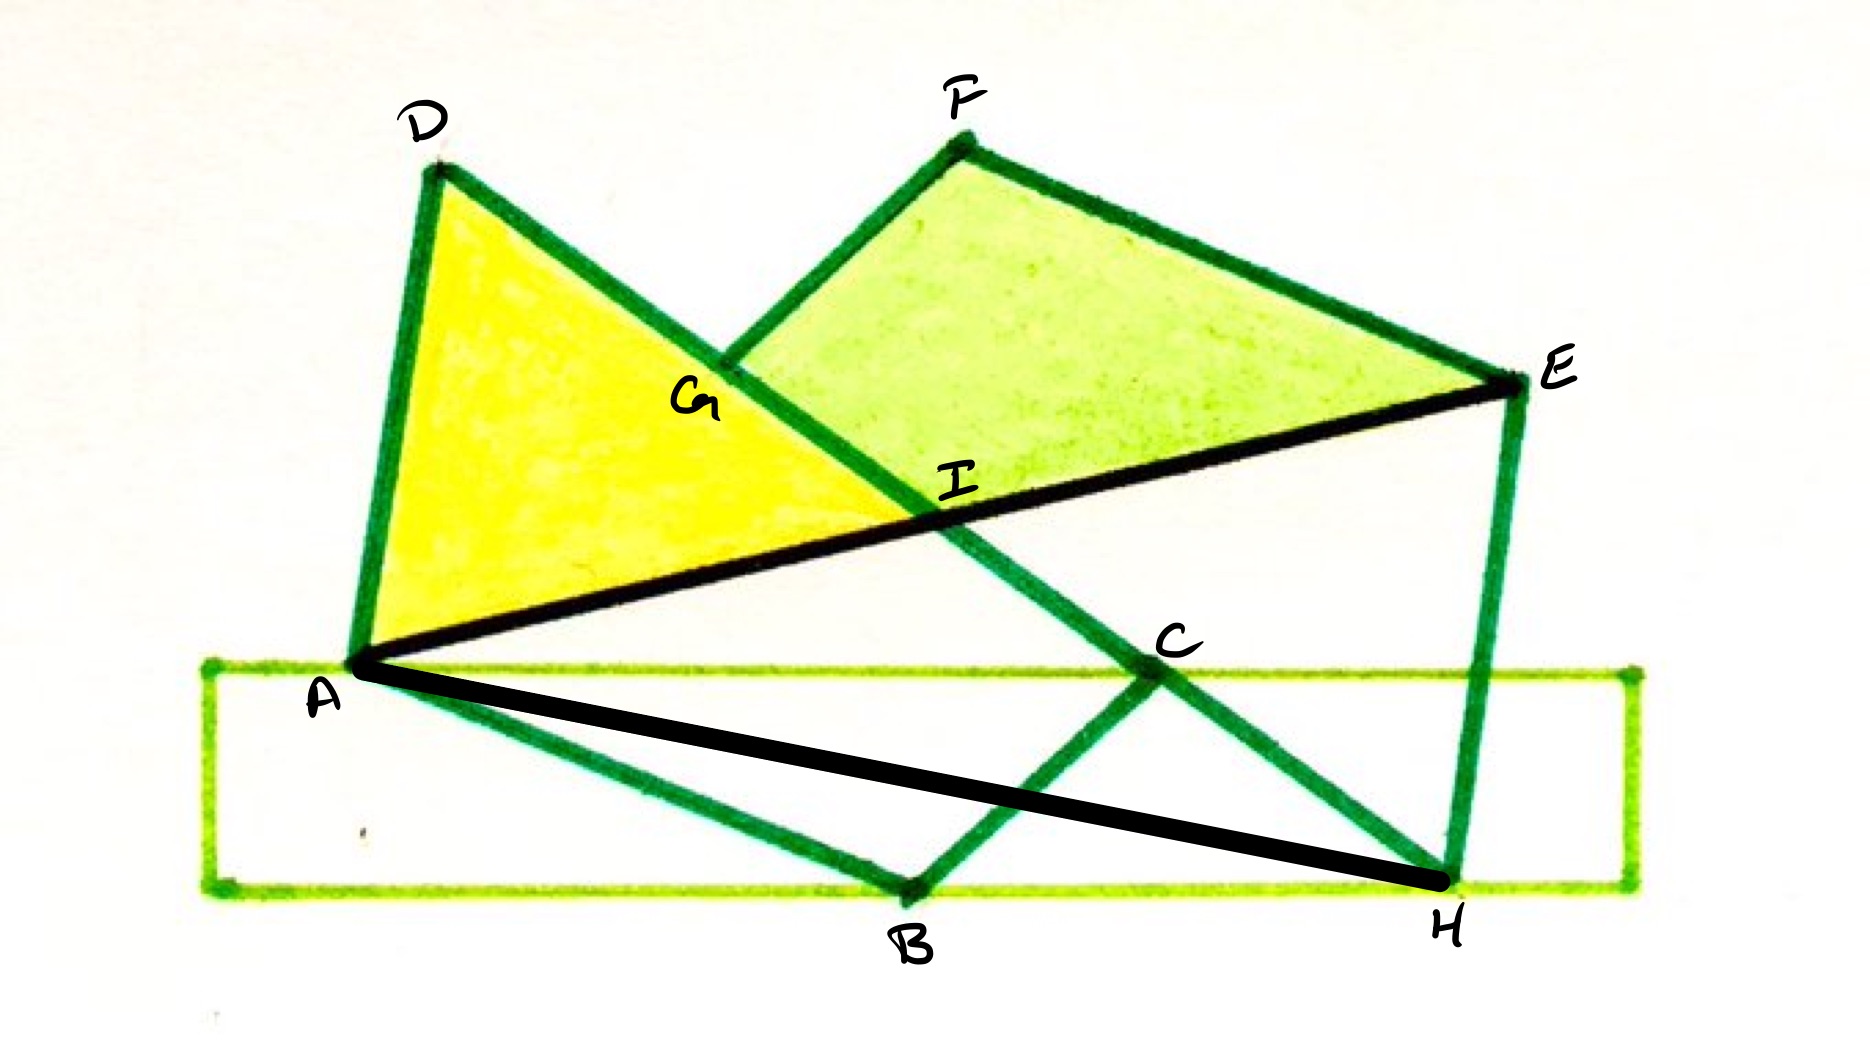 Two congruent quadrilaterals and a rectangle labelled